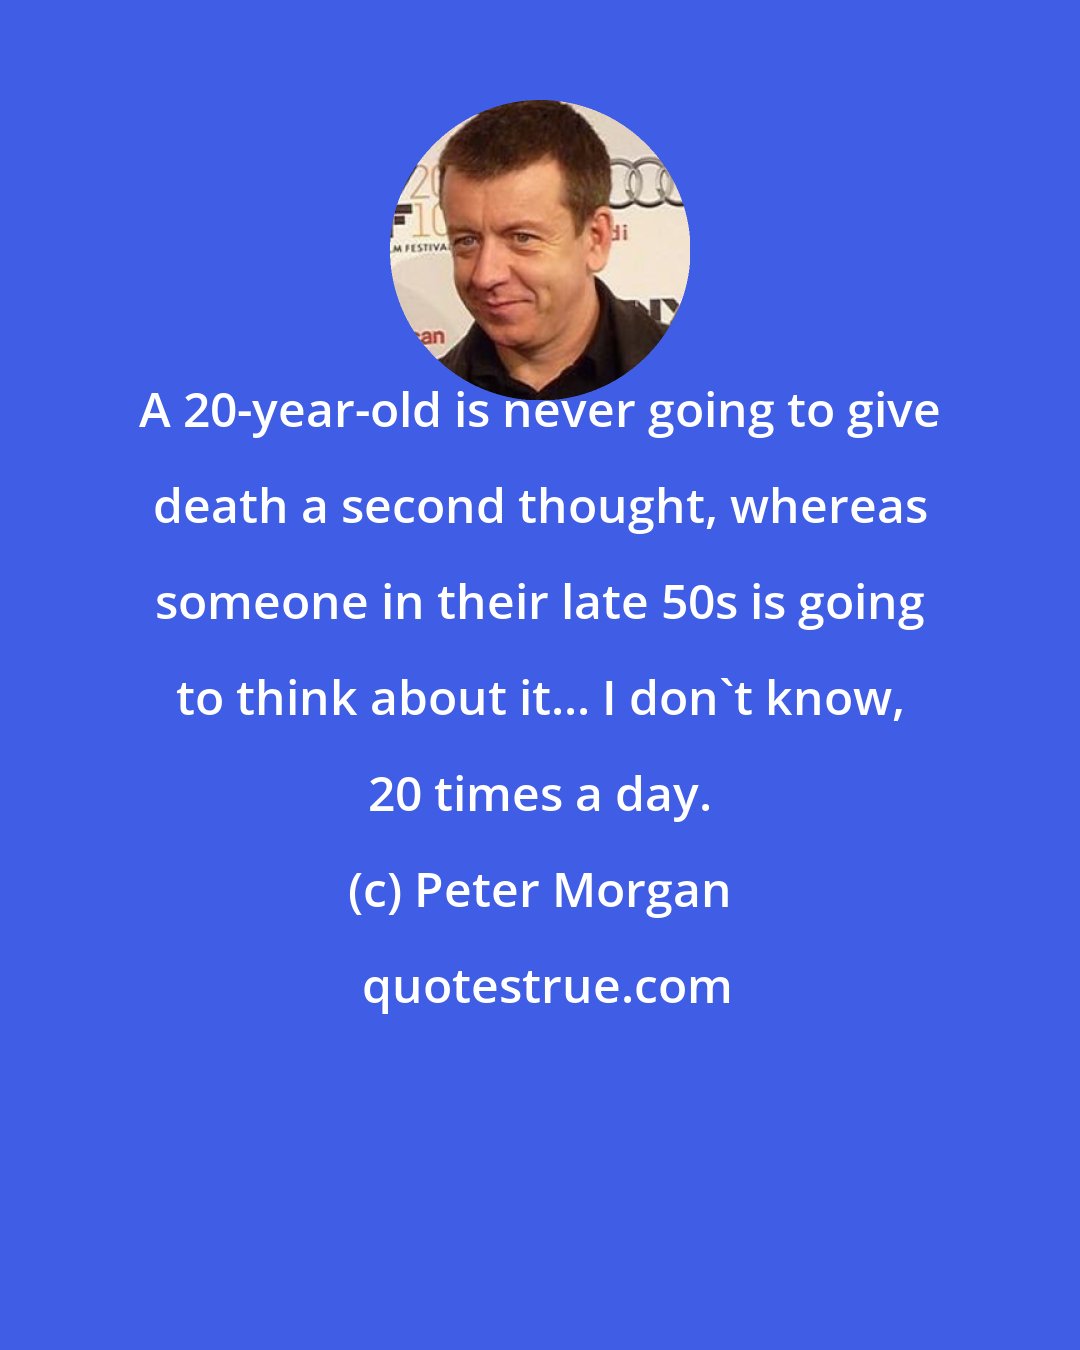 Peter Morgan: A 20-year-old is never going to give death a second thought, whereas someone in their late 50s is going to think about it... I don't know, 20 times a day.